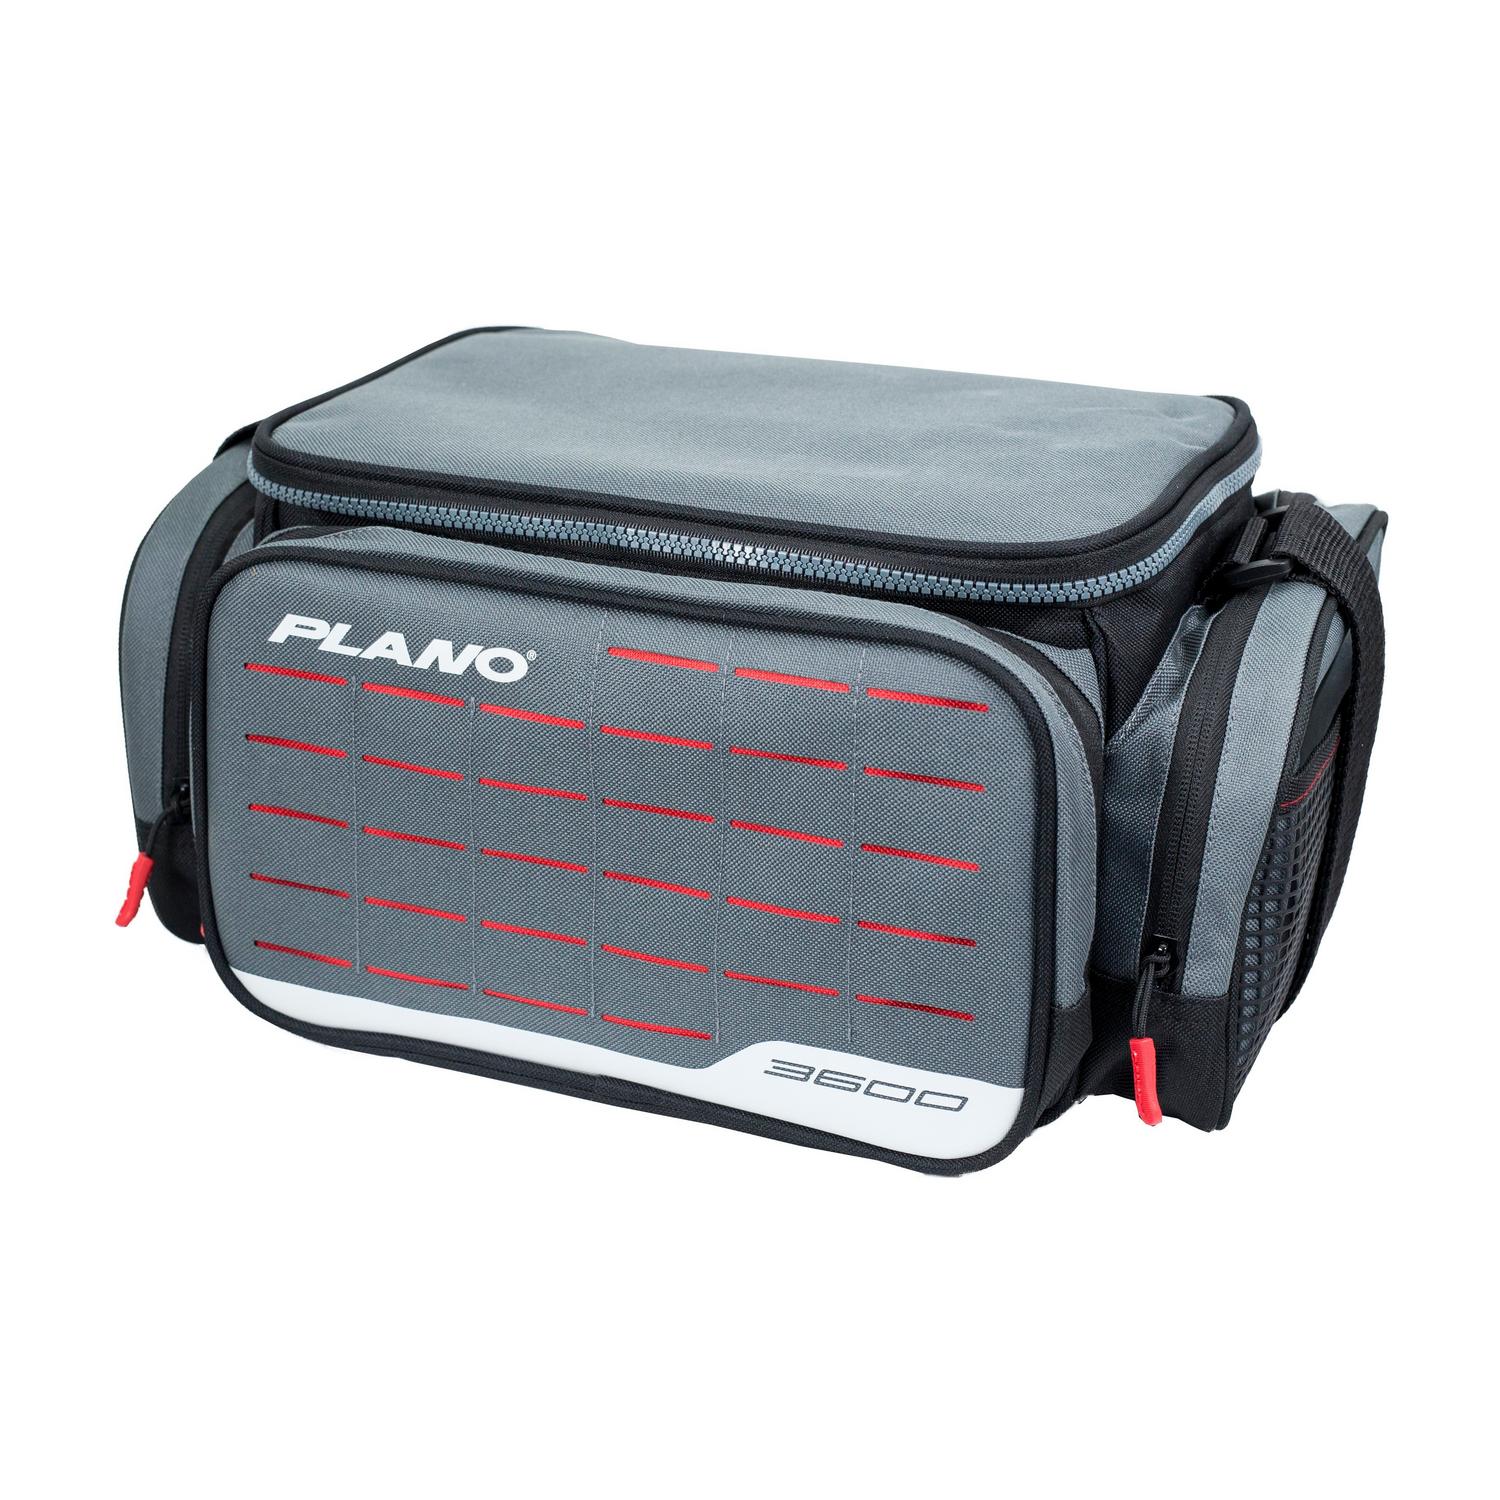 Red PLANO WEEKEND SERIES 3600 DLX FISHING TACKLE BAG with 2 STOWAWAY BOXES